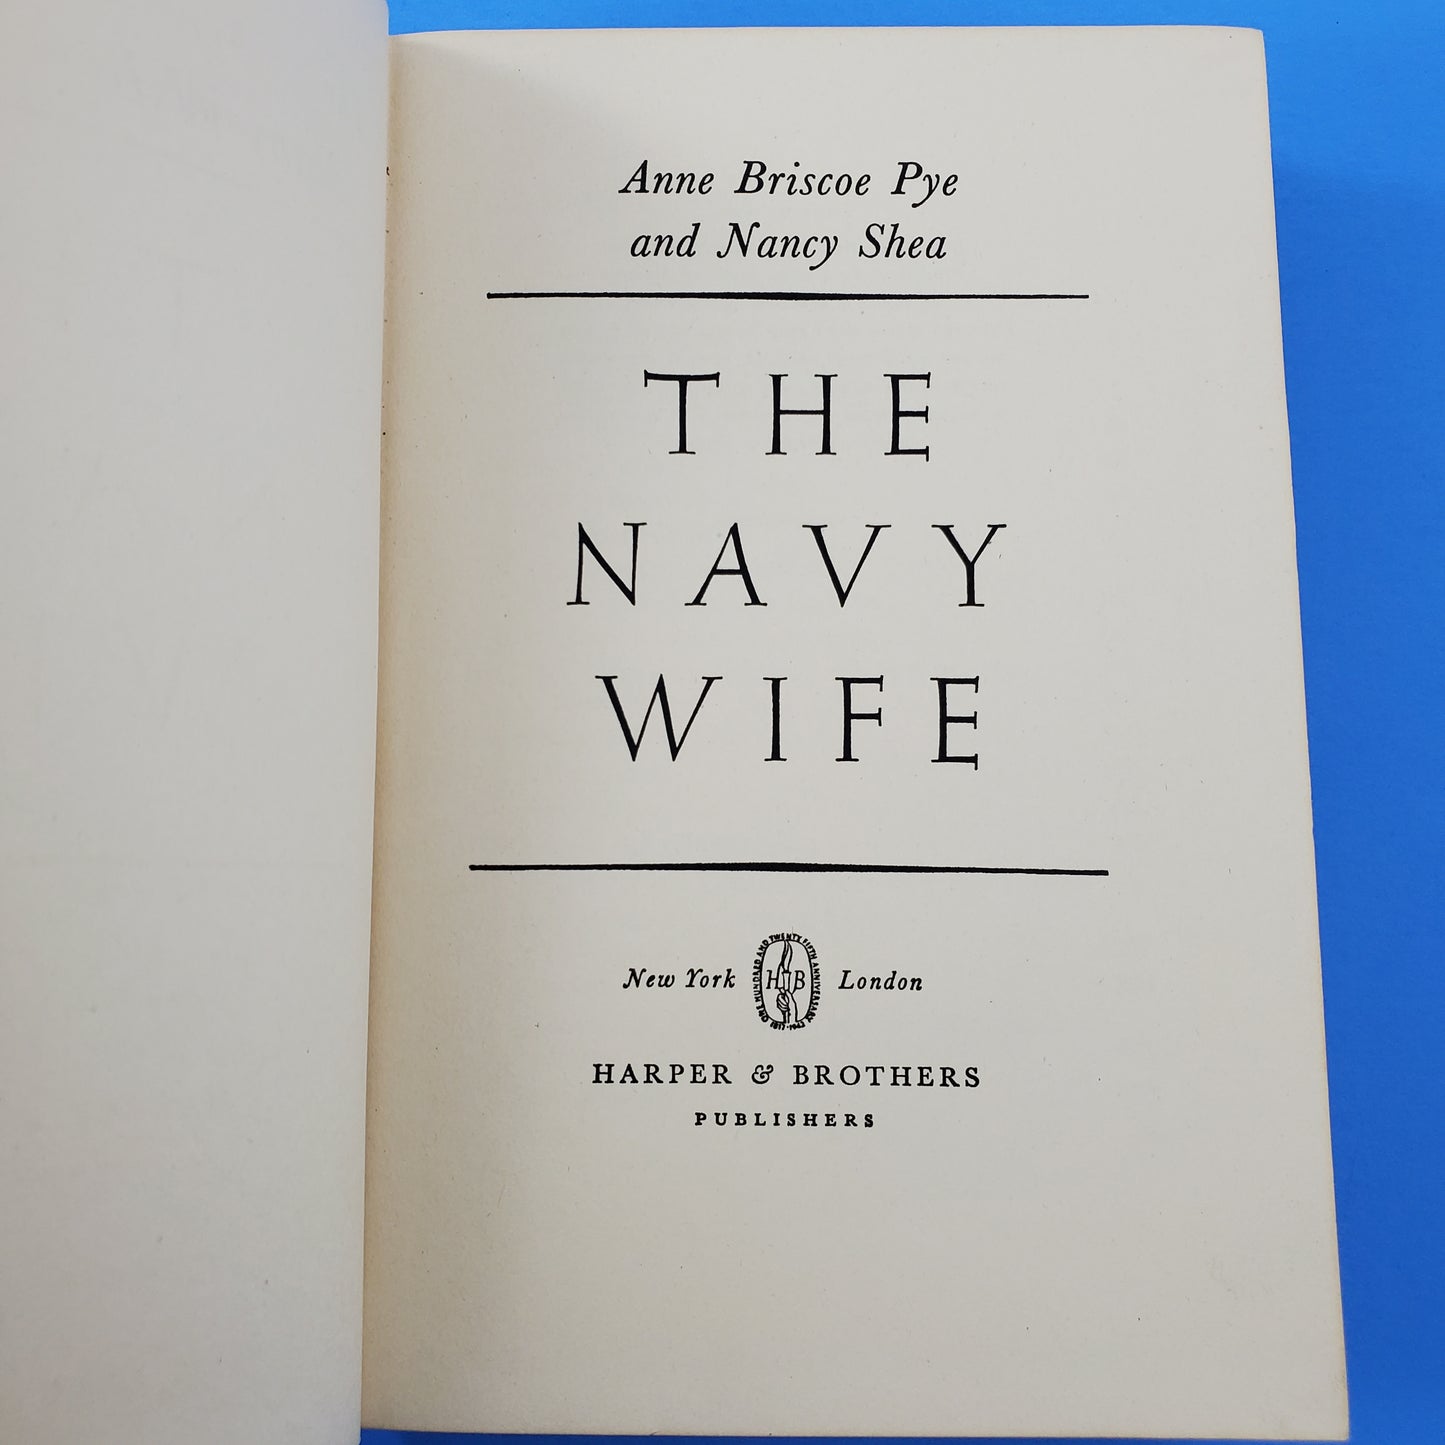 The Navy Wife